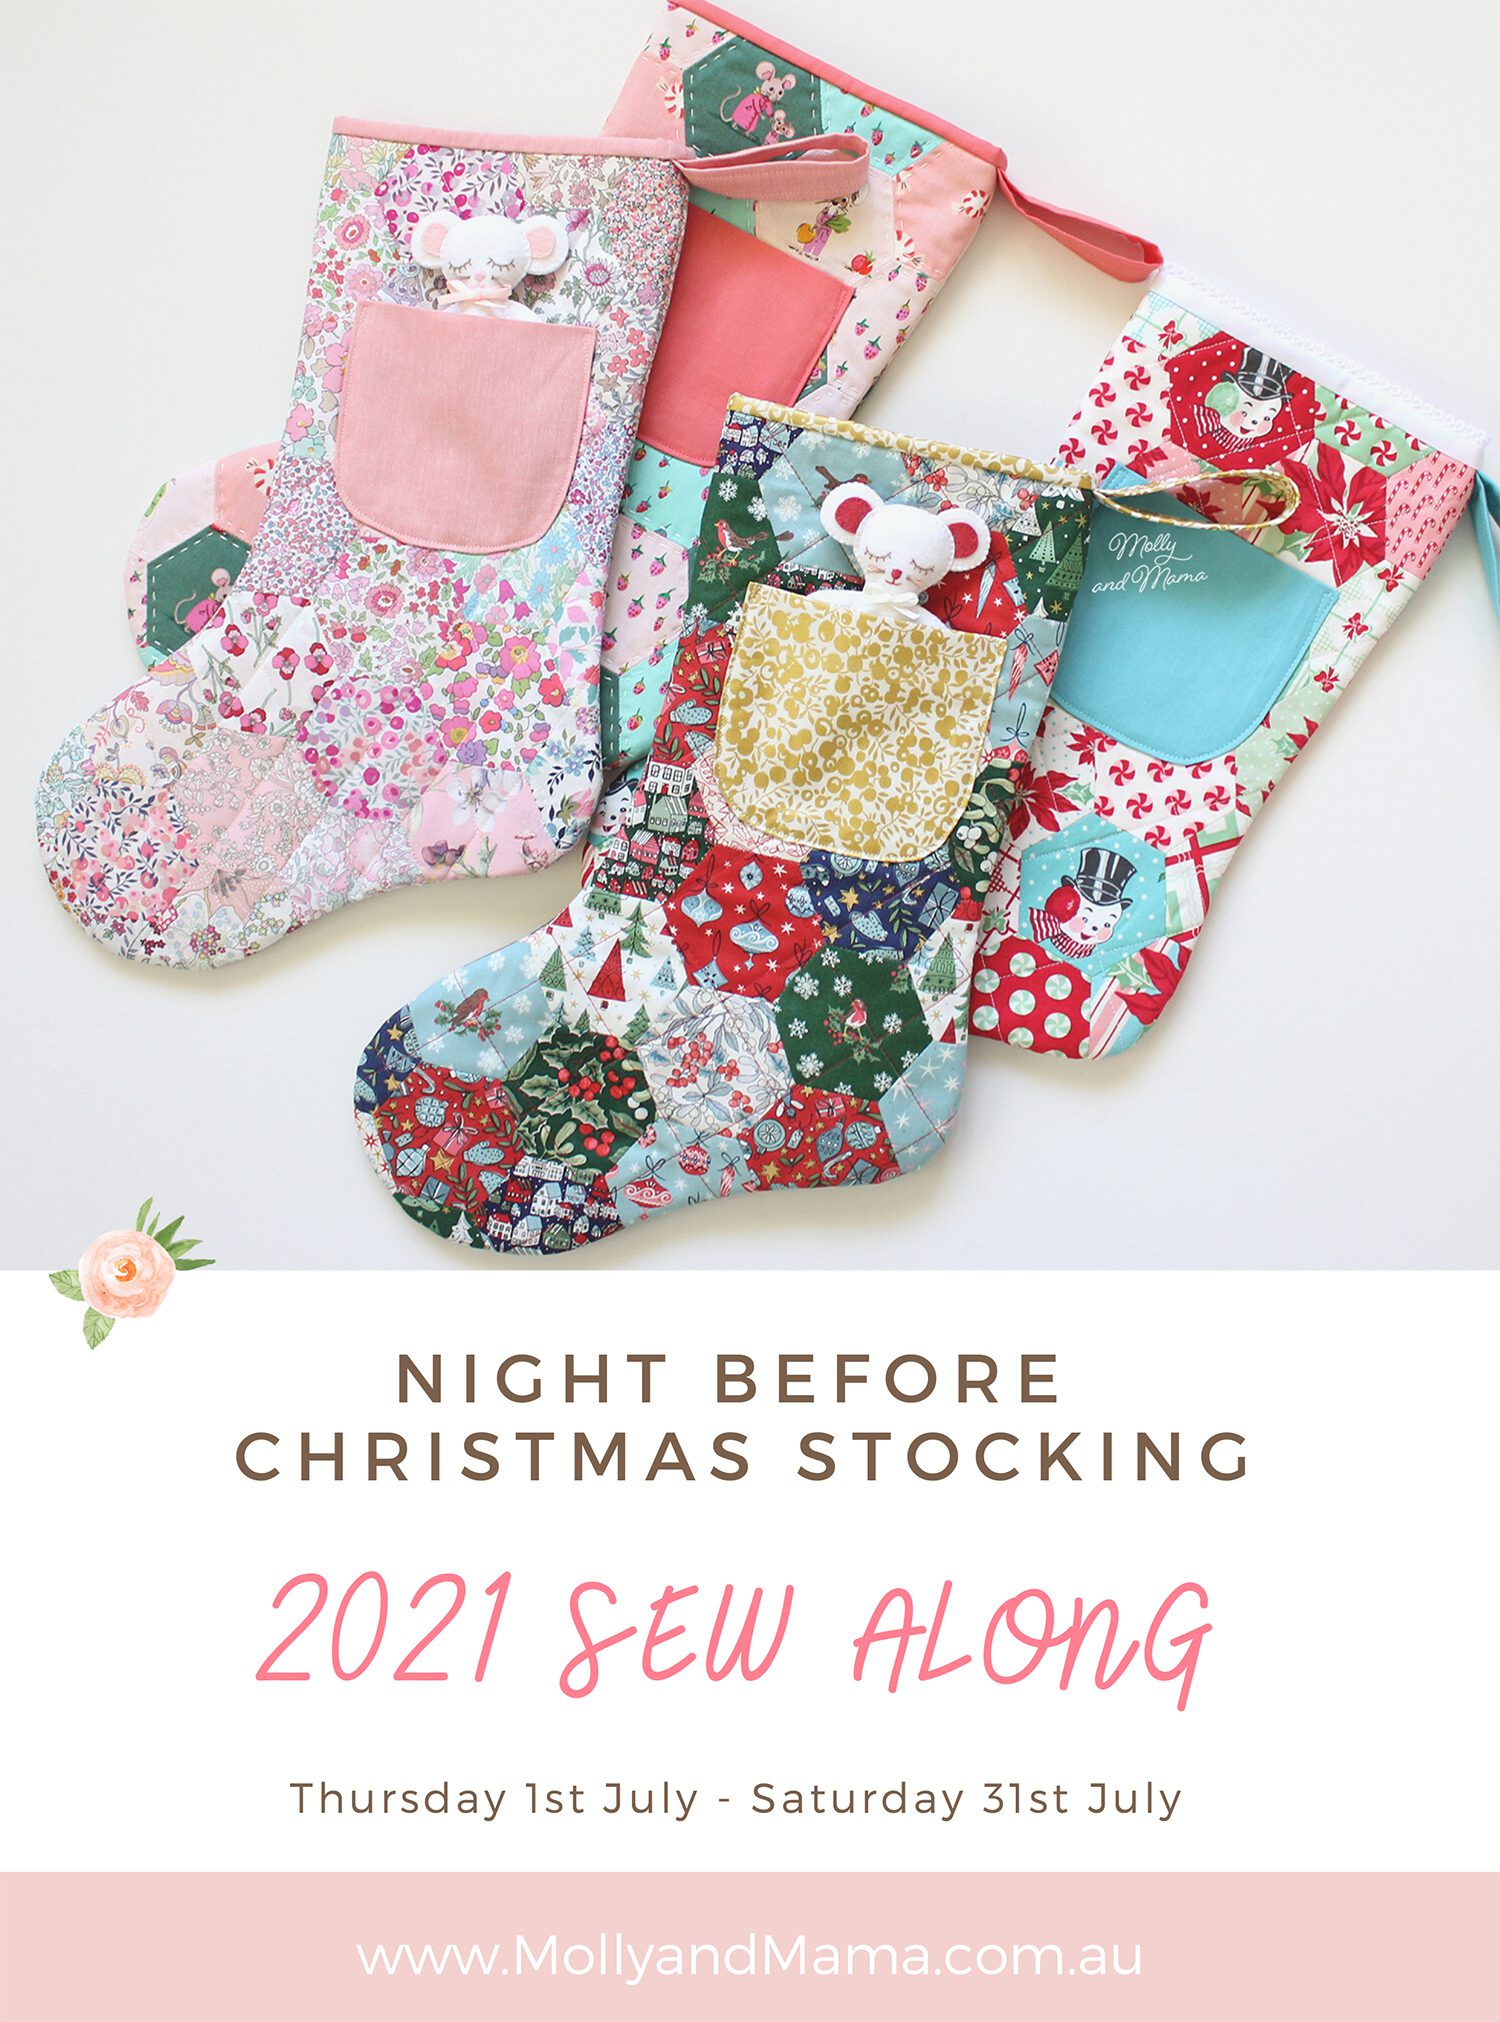 Welcome to the 2021 ‘Night Before Christmas Stocking’ Sew Along